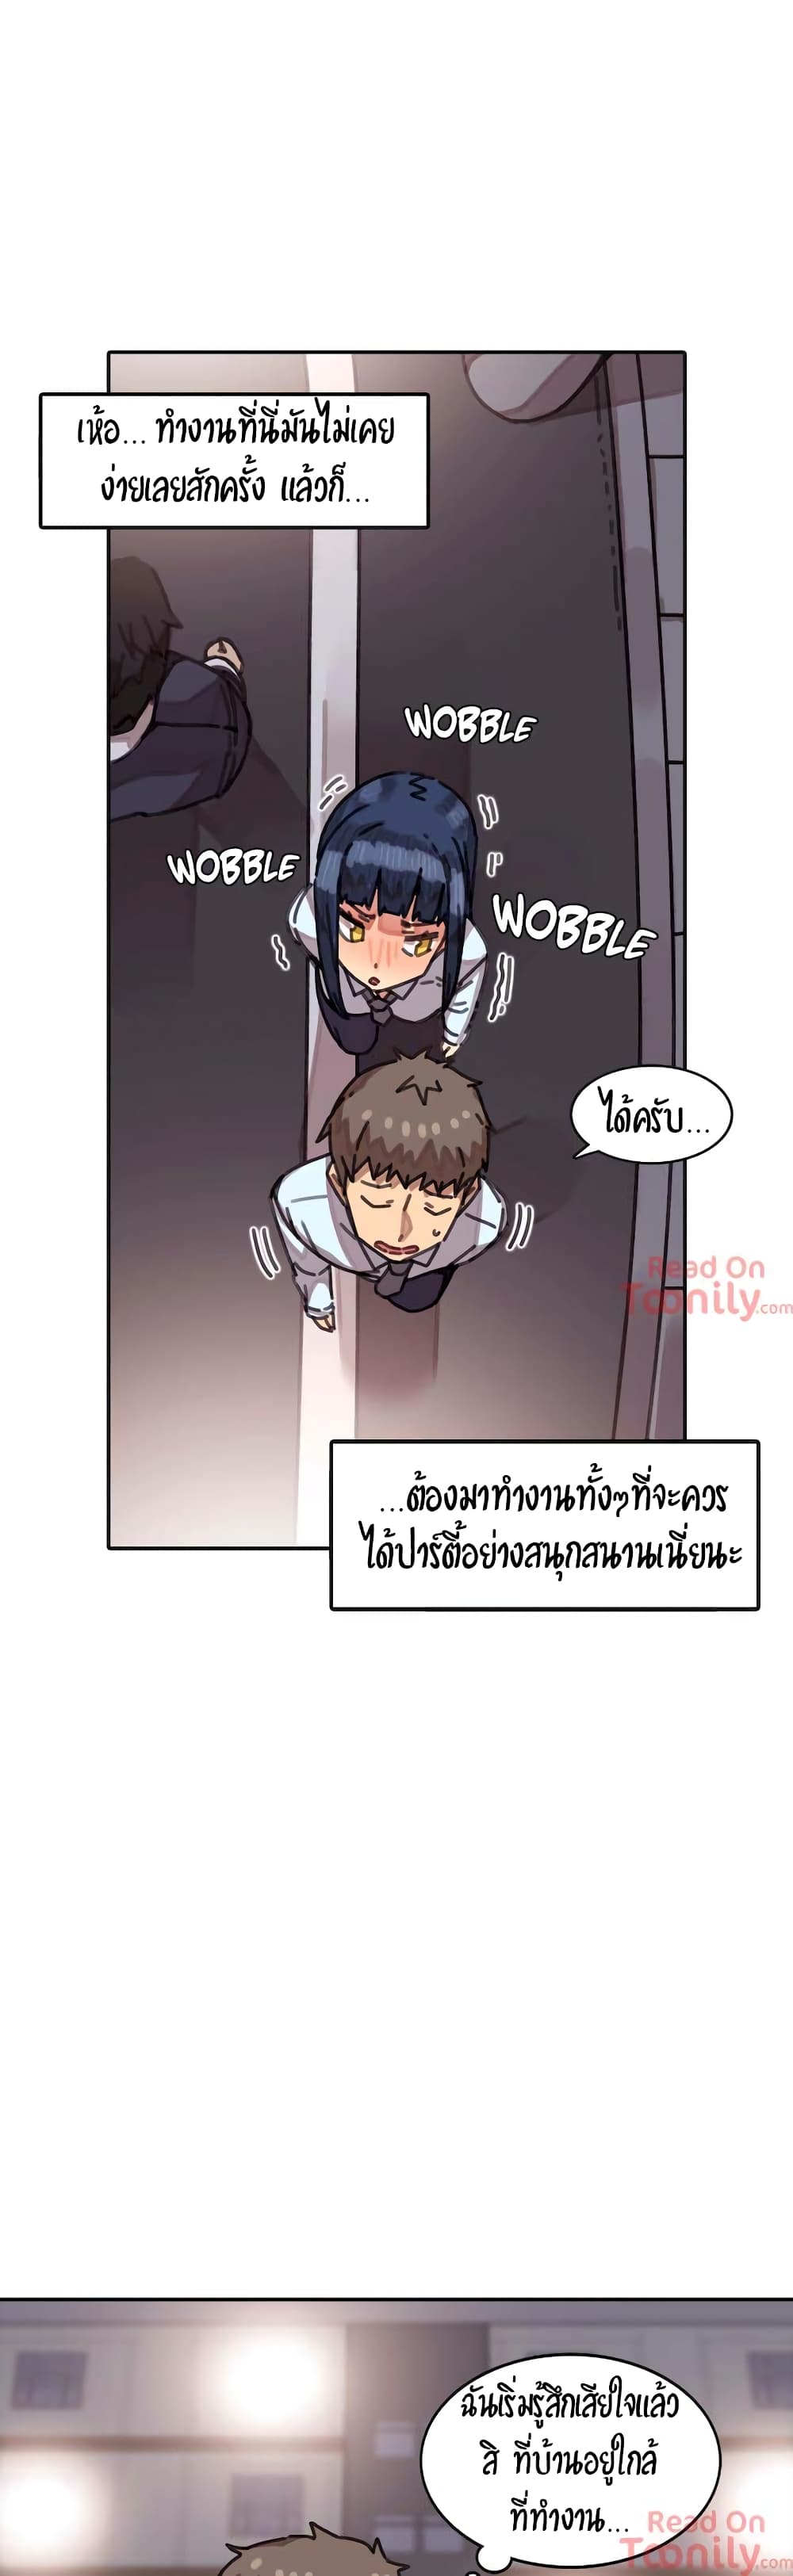 The Girl That Lingers in the Wall - หน้า 29